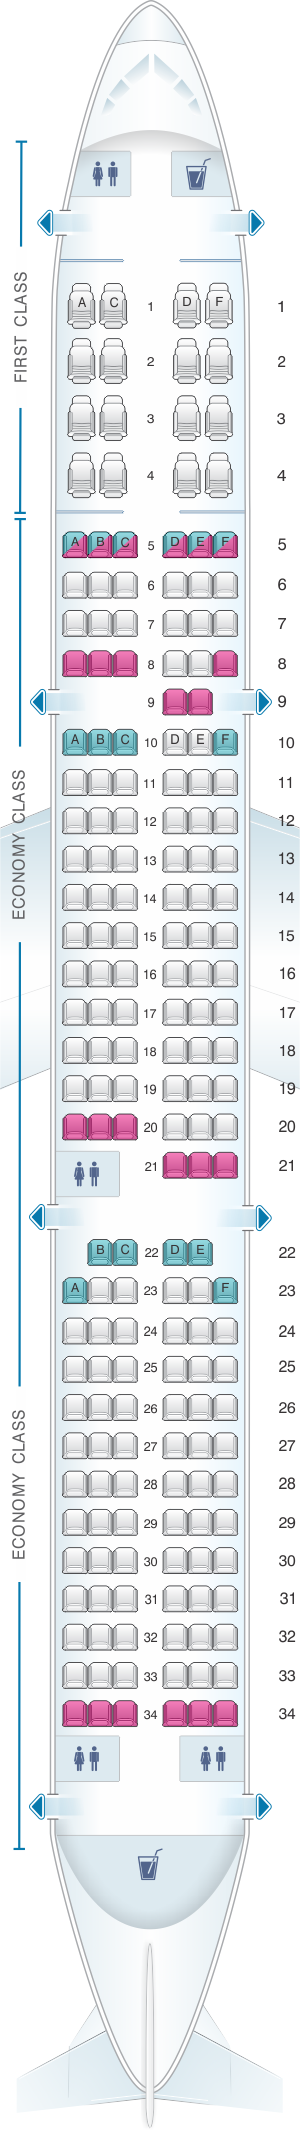 Seat Map American Airlines Airbus A321 187pax | SeatMaestro